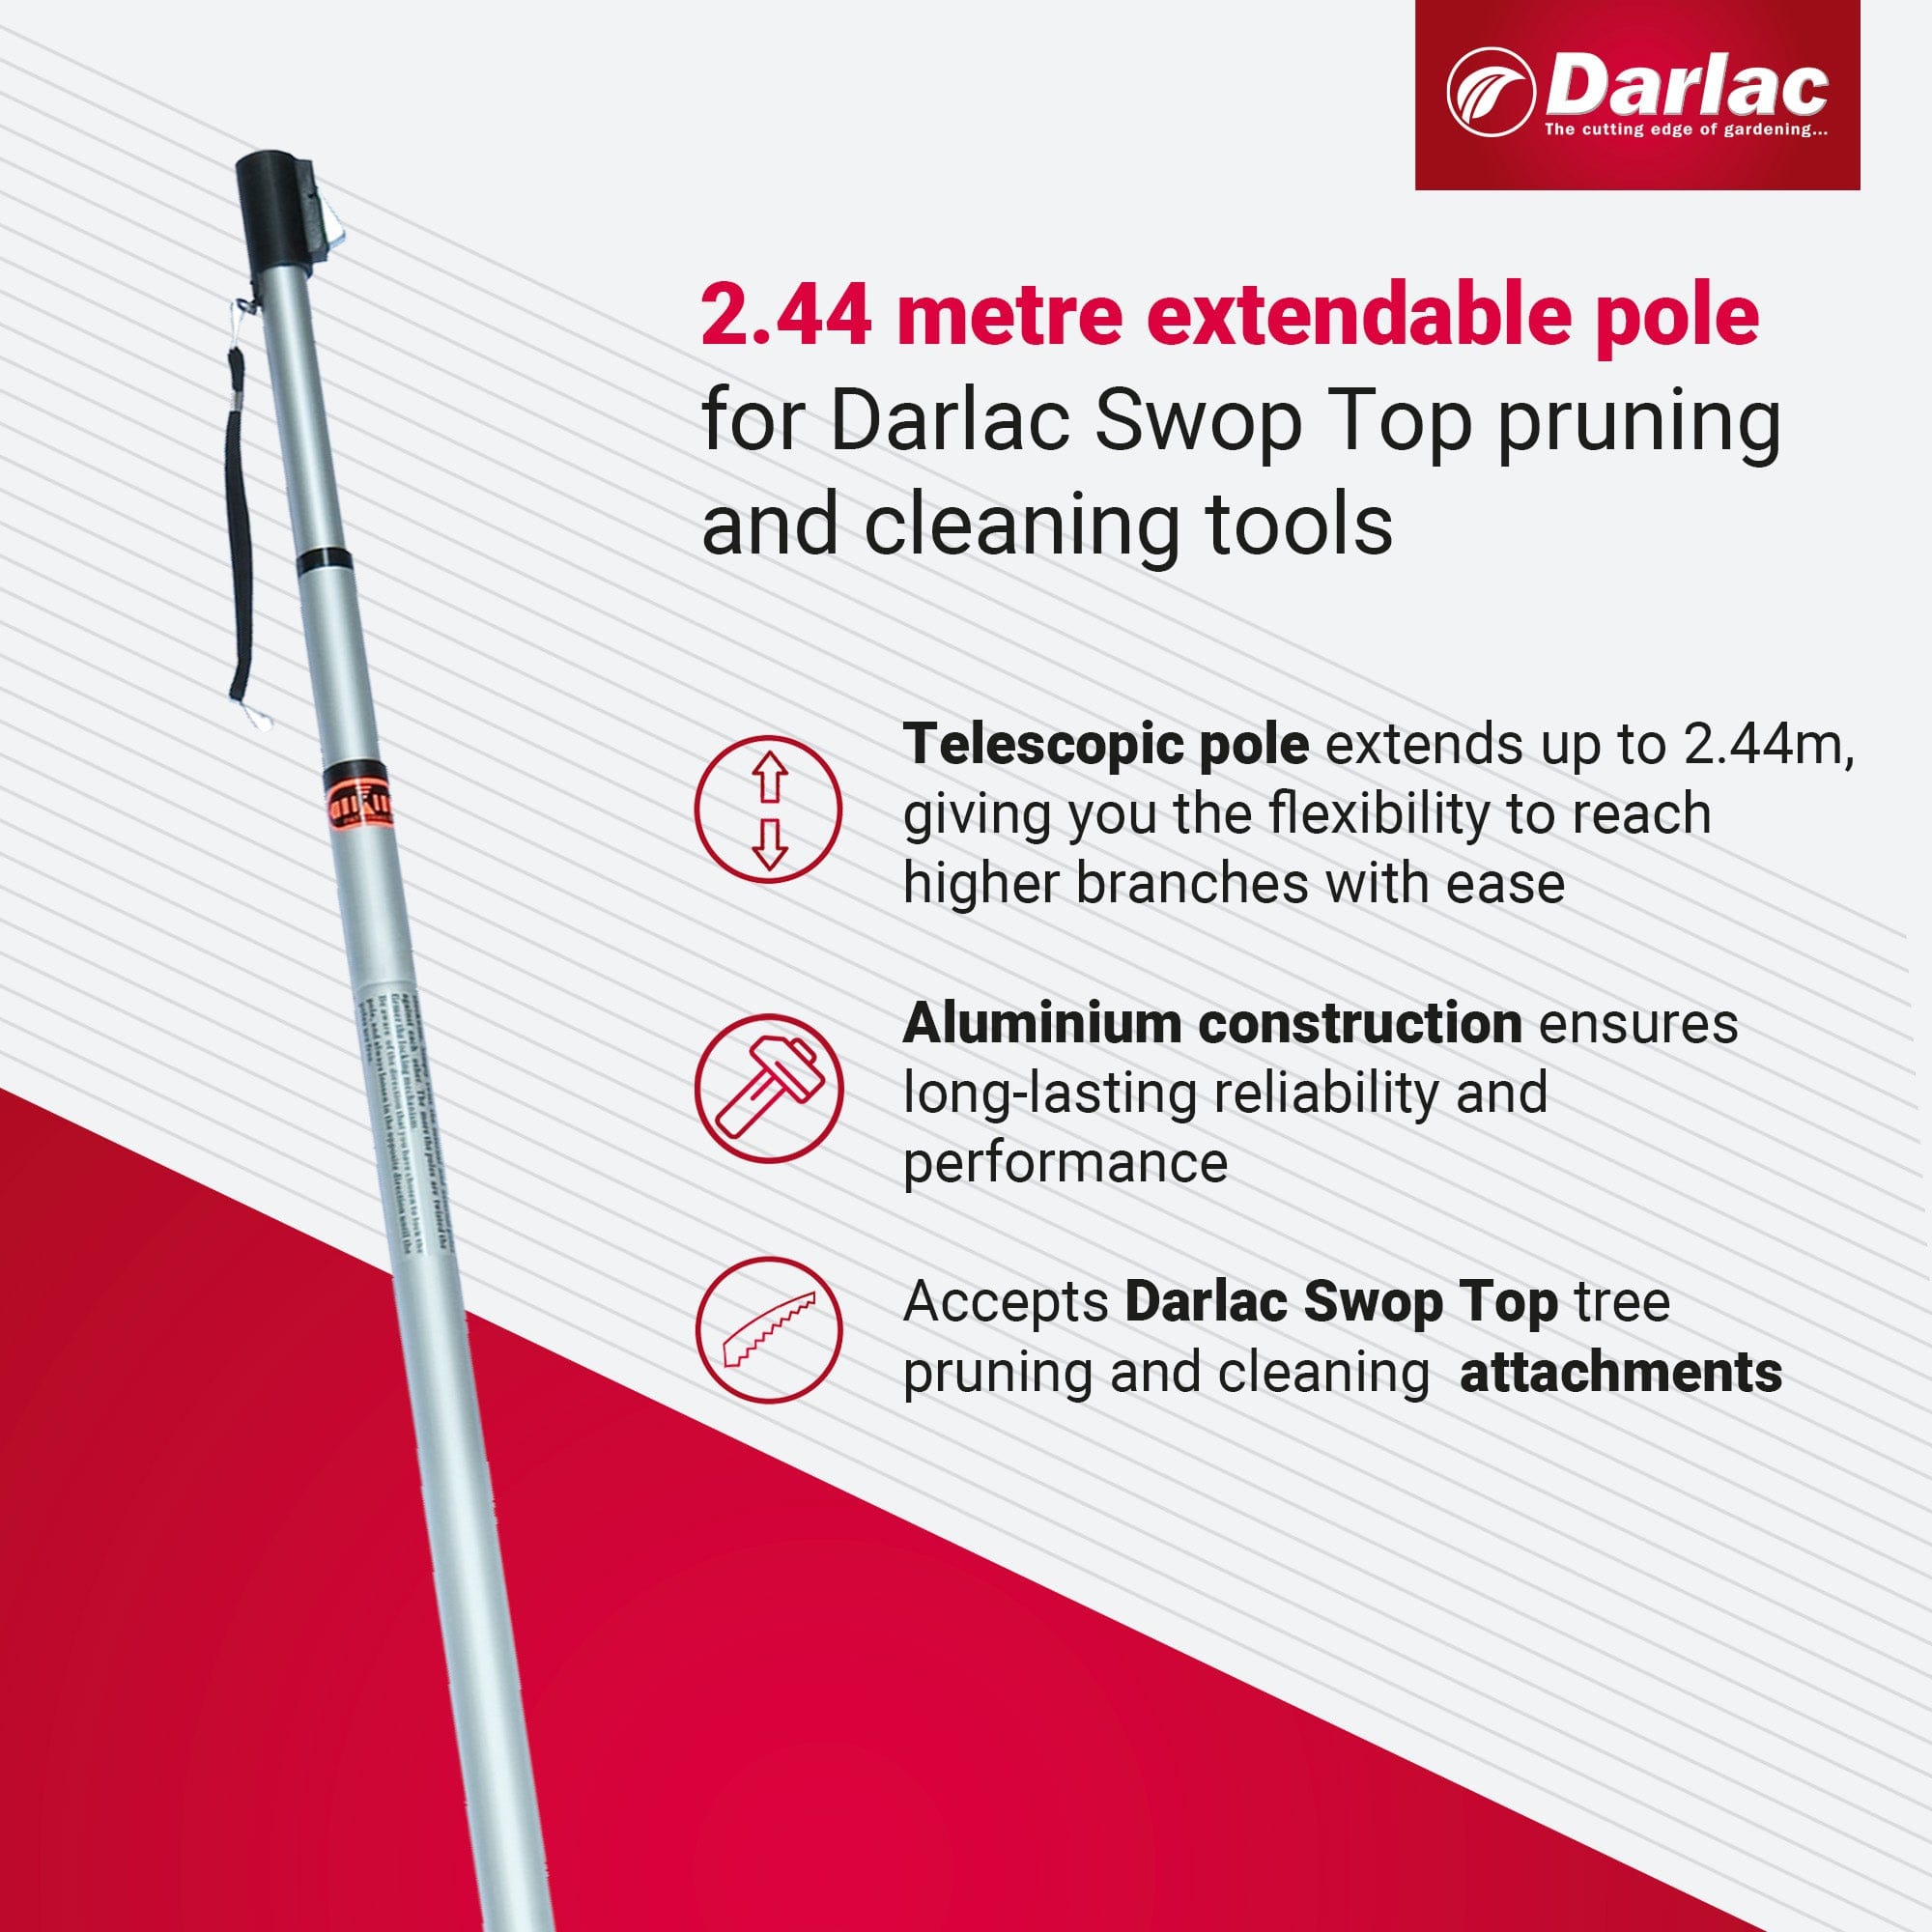 dt-brown HARDWARE Darlac Swop Top 3 Section Standard Telescopic Pole 2.44m